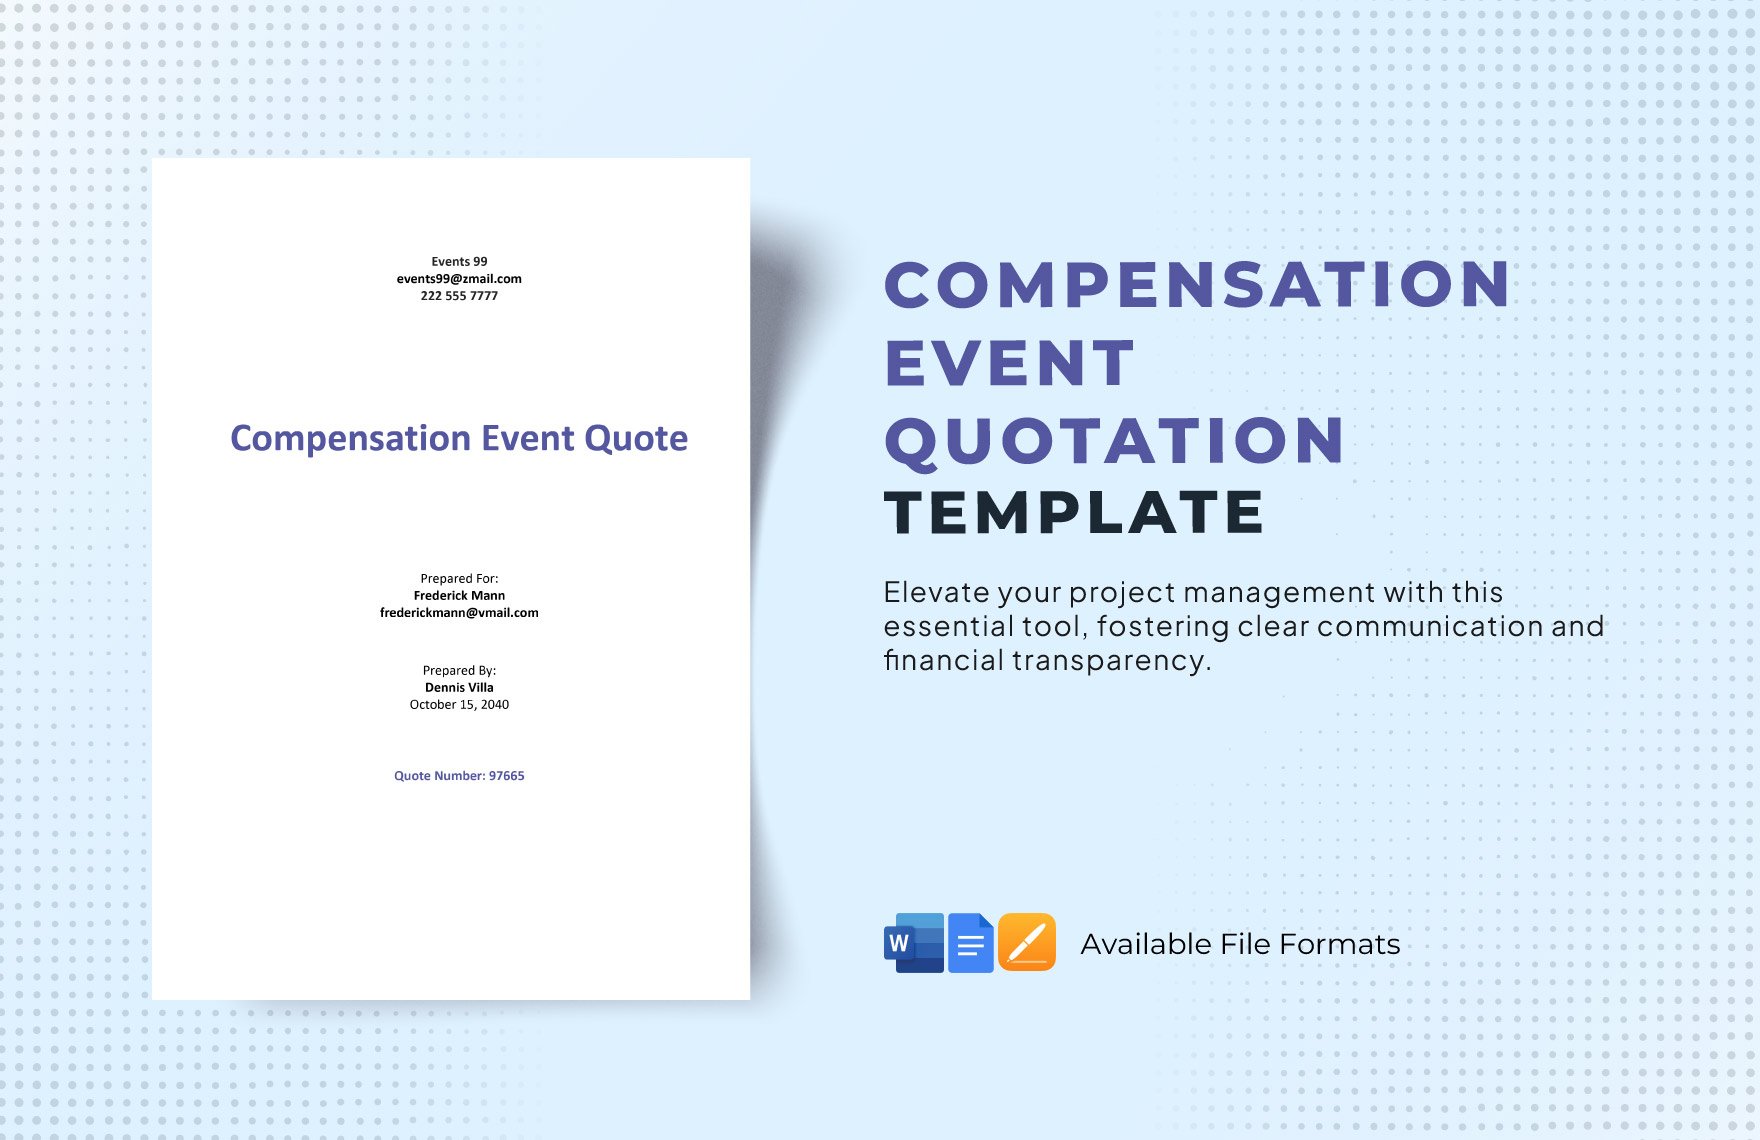 Compensation Event Quotation Template in Word, Google Docs, Excel, Google Sheets, Apple Pages